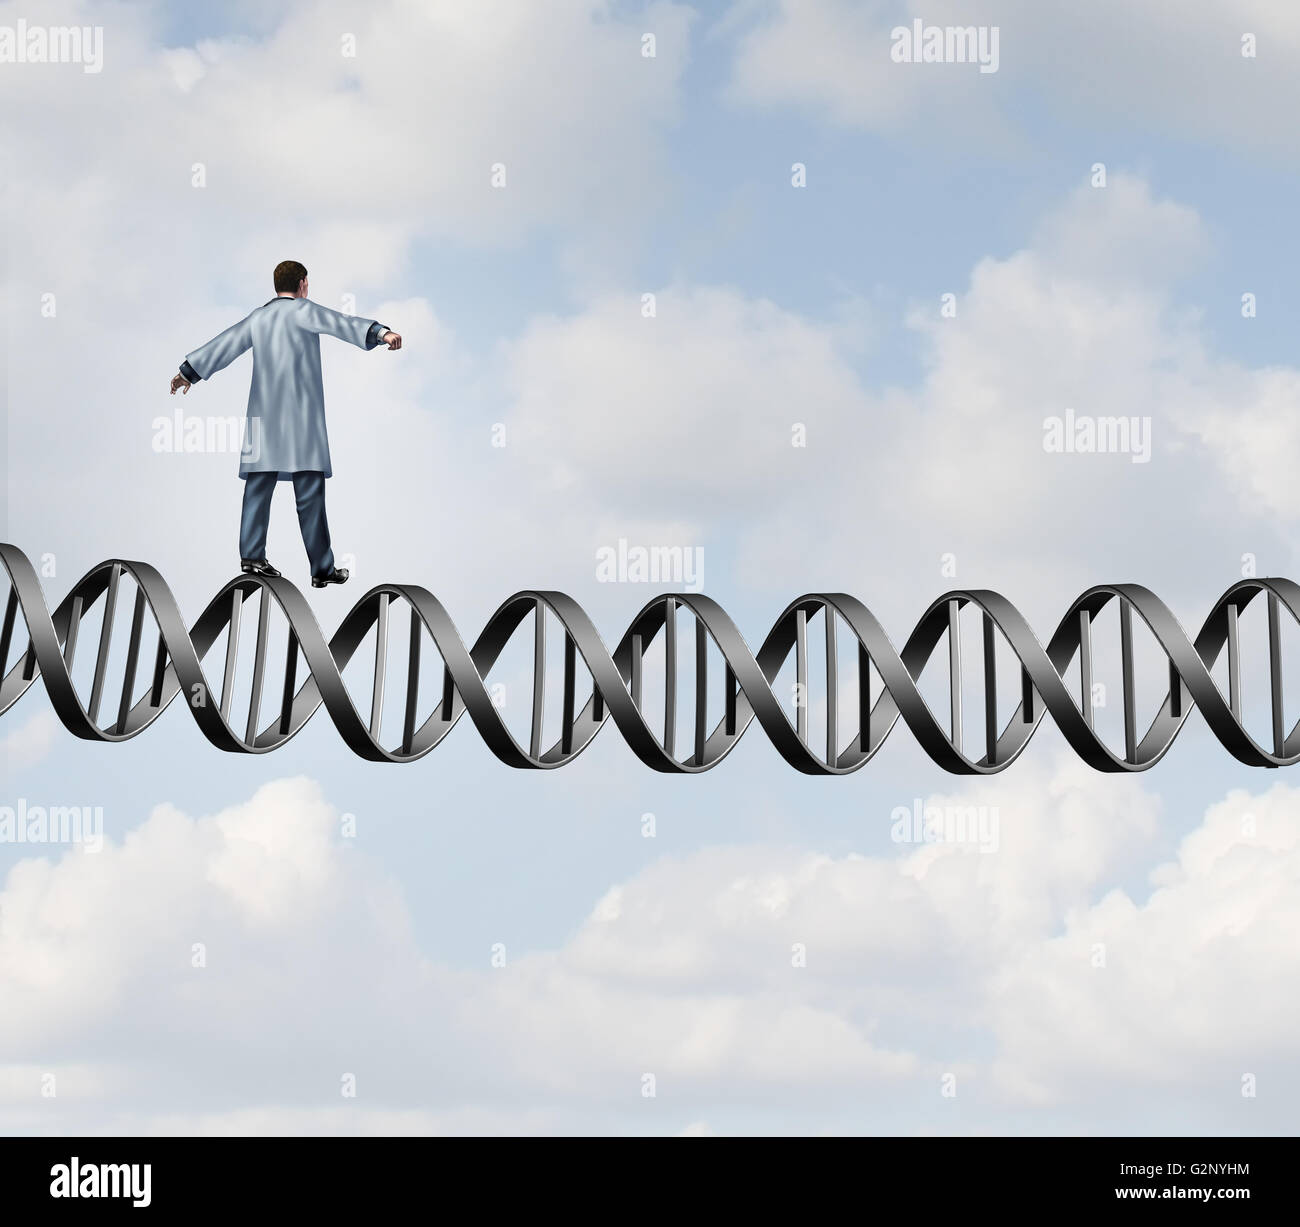 Genetic research doctor challenge as a biologist scientistist walking on a DNA helix strand as a medical biotechnology symbol with 3D illustration elements. Stock Photo